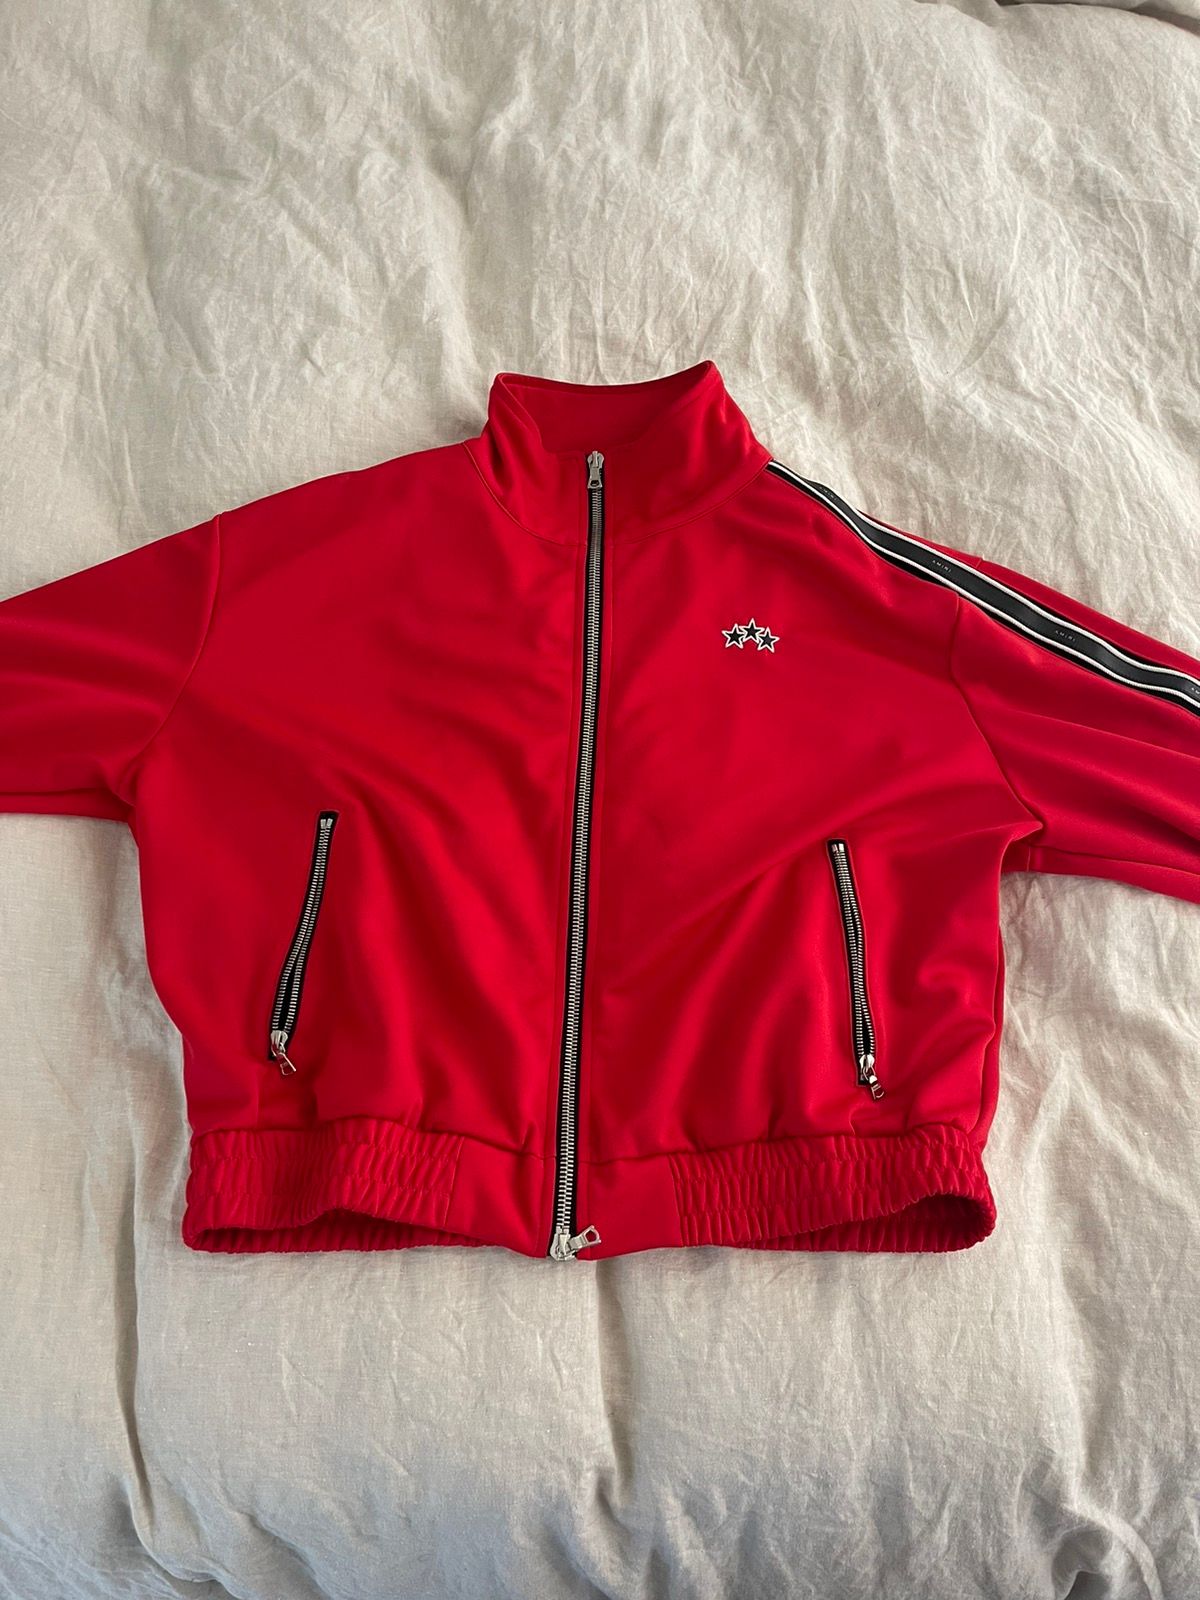 Pre-owned Amiri Red  Zip Up Track Jacket Size Medium